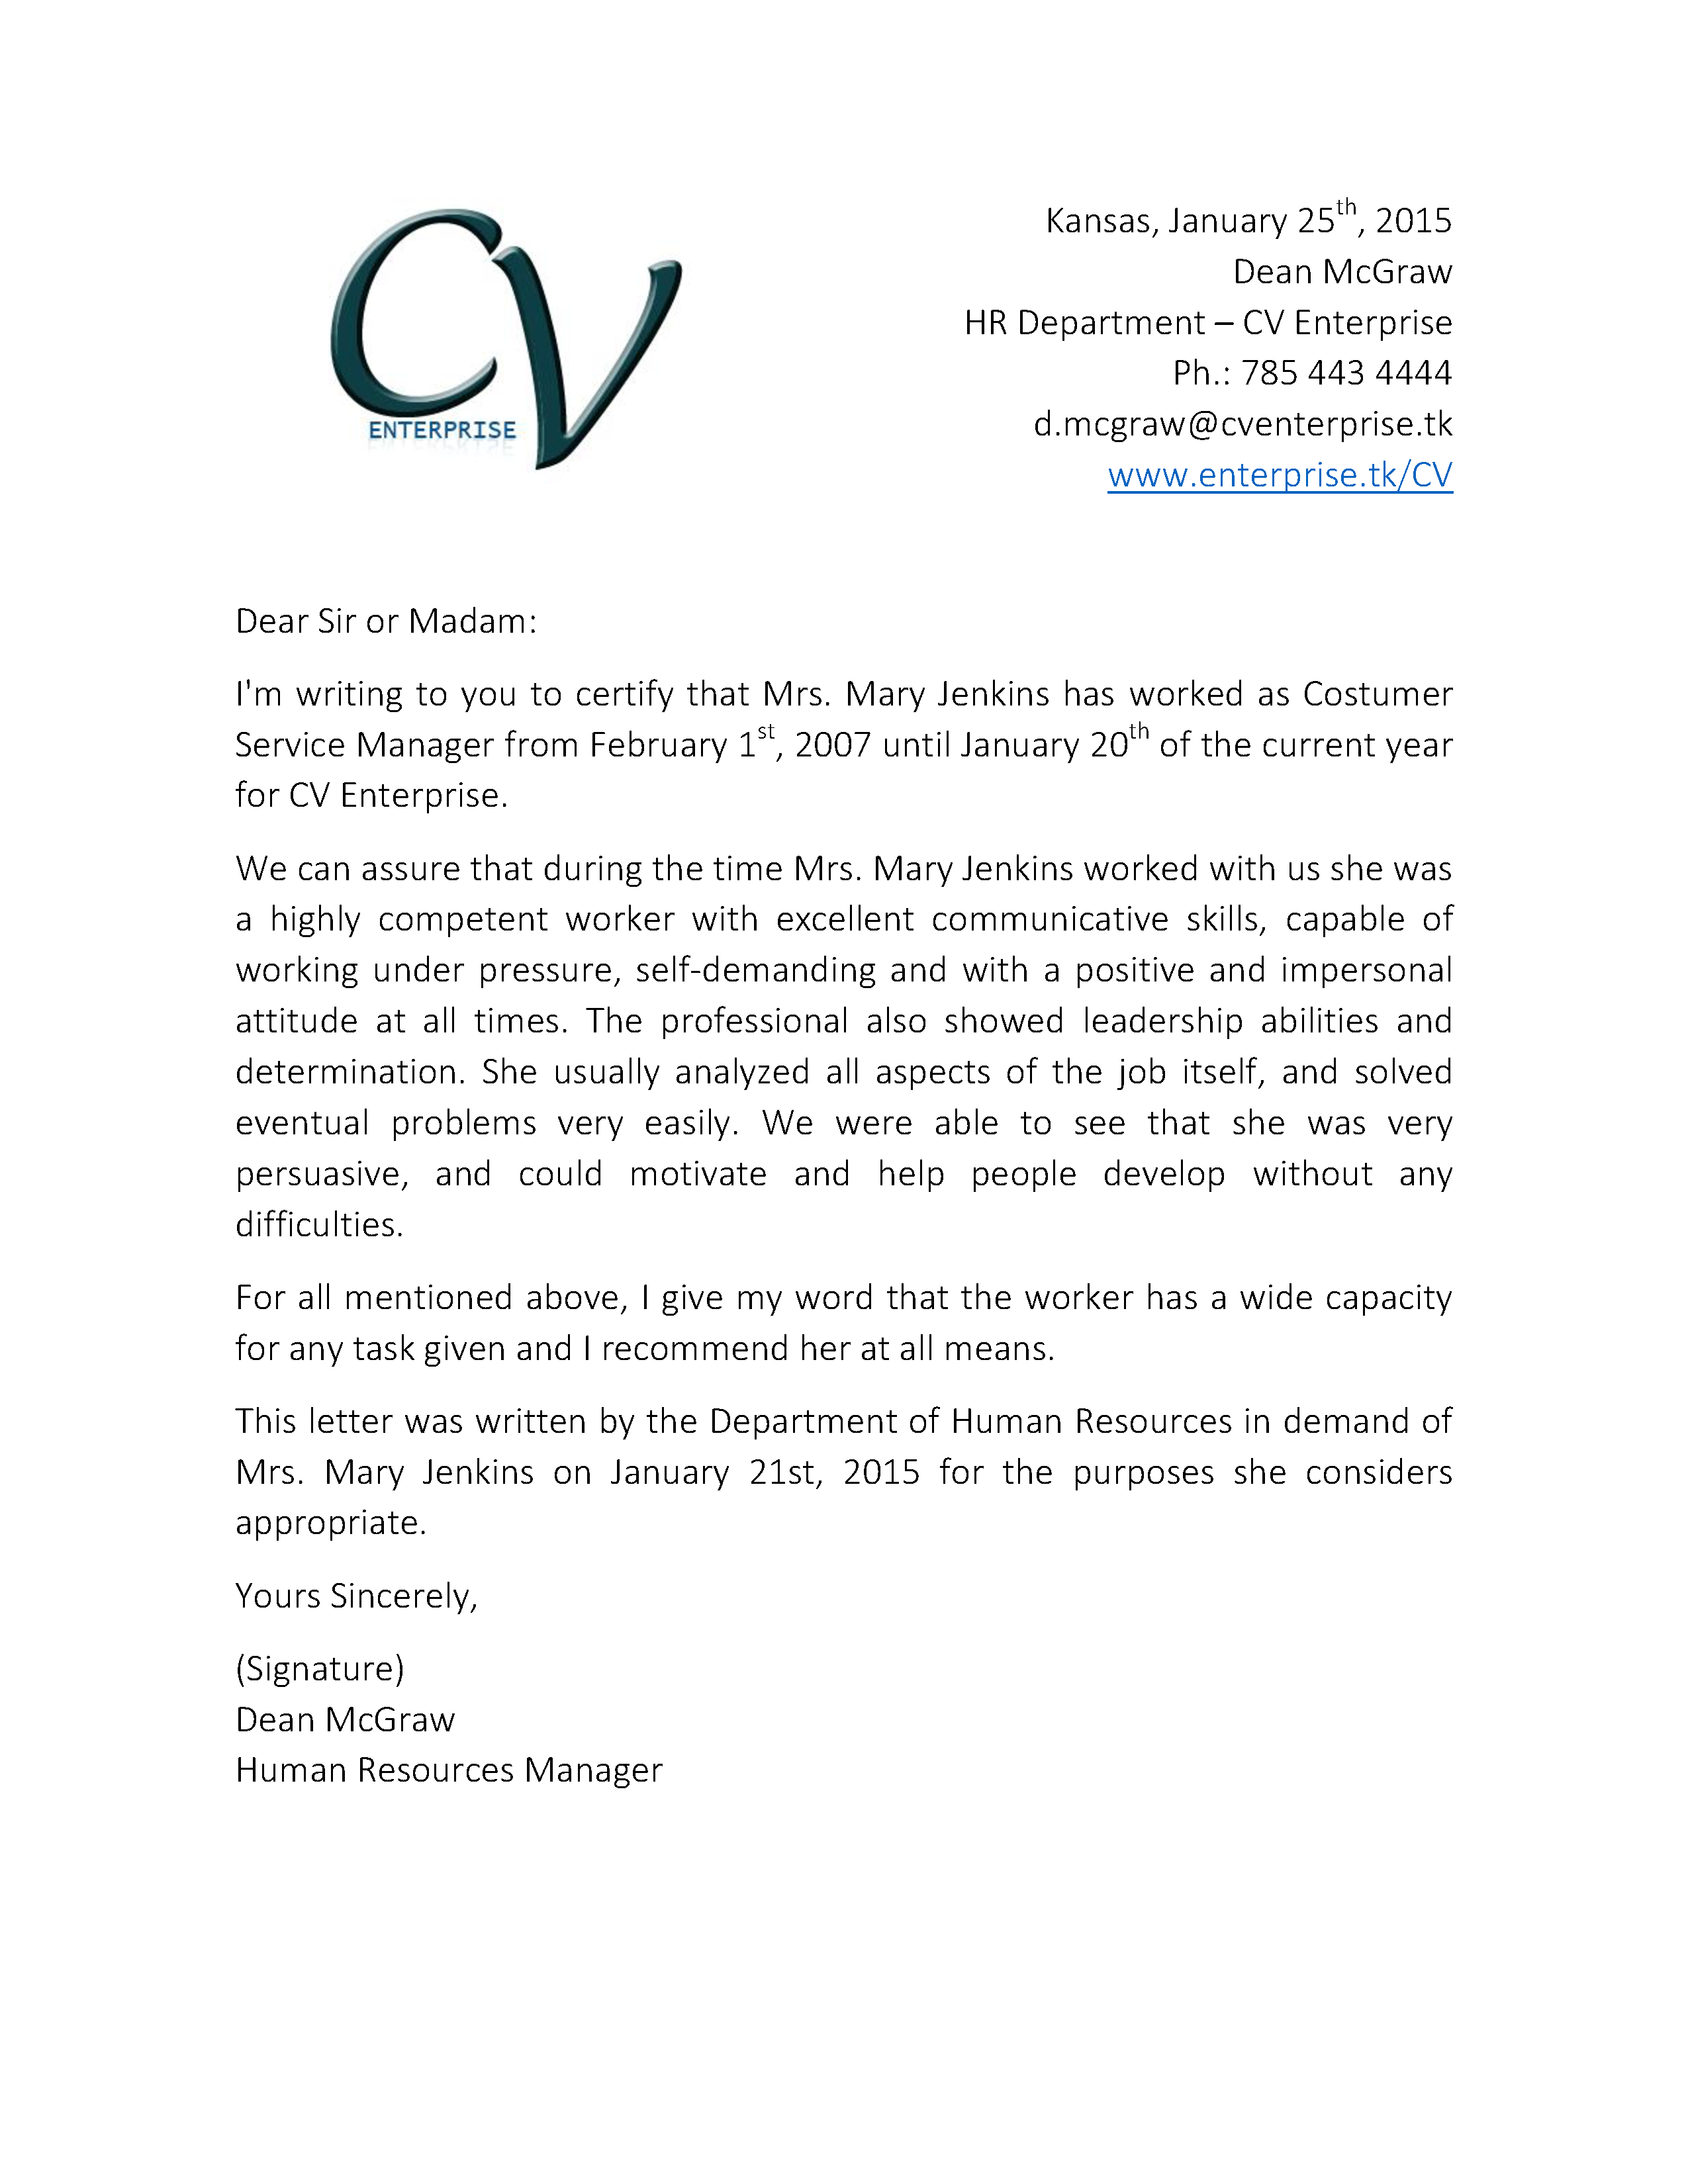 Recommendation Letter for Customer Service Job 2 Grow